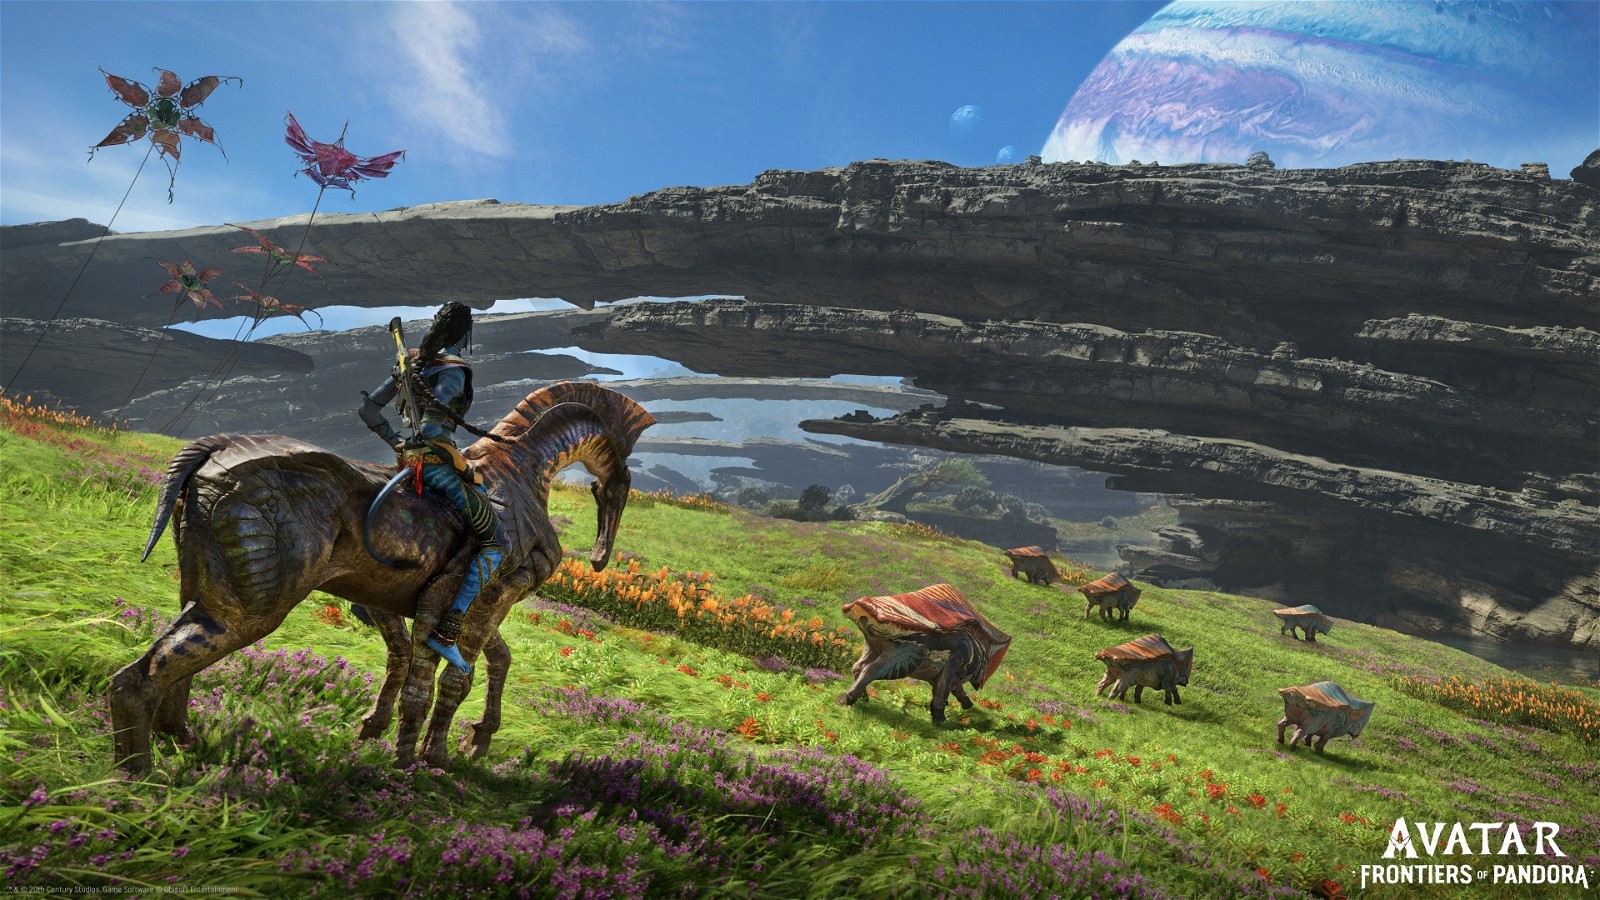 You can ride Direhorses and Ikrans in Avatar: Frontiers of Pandora.